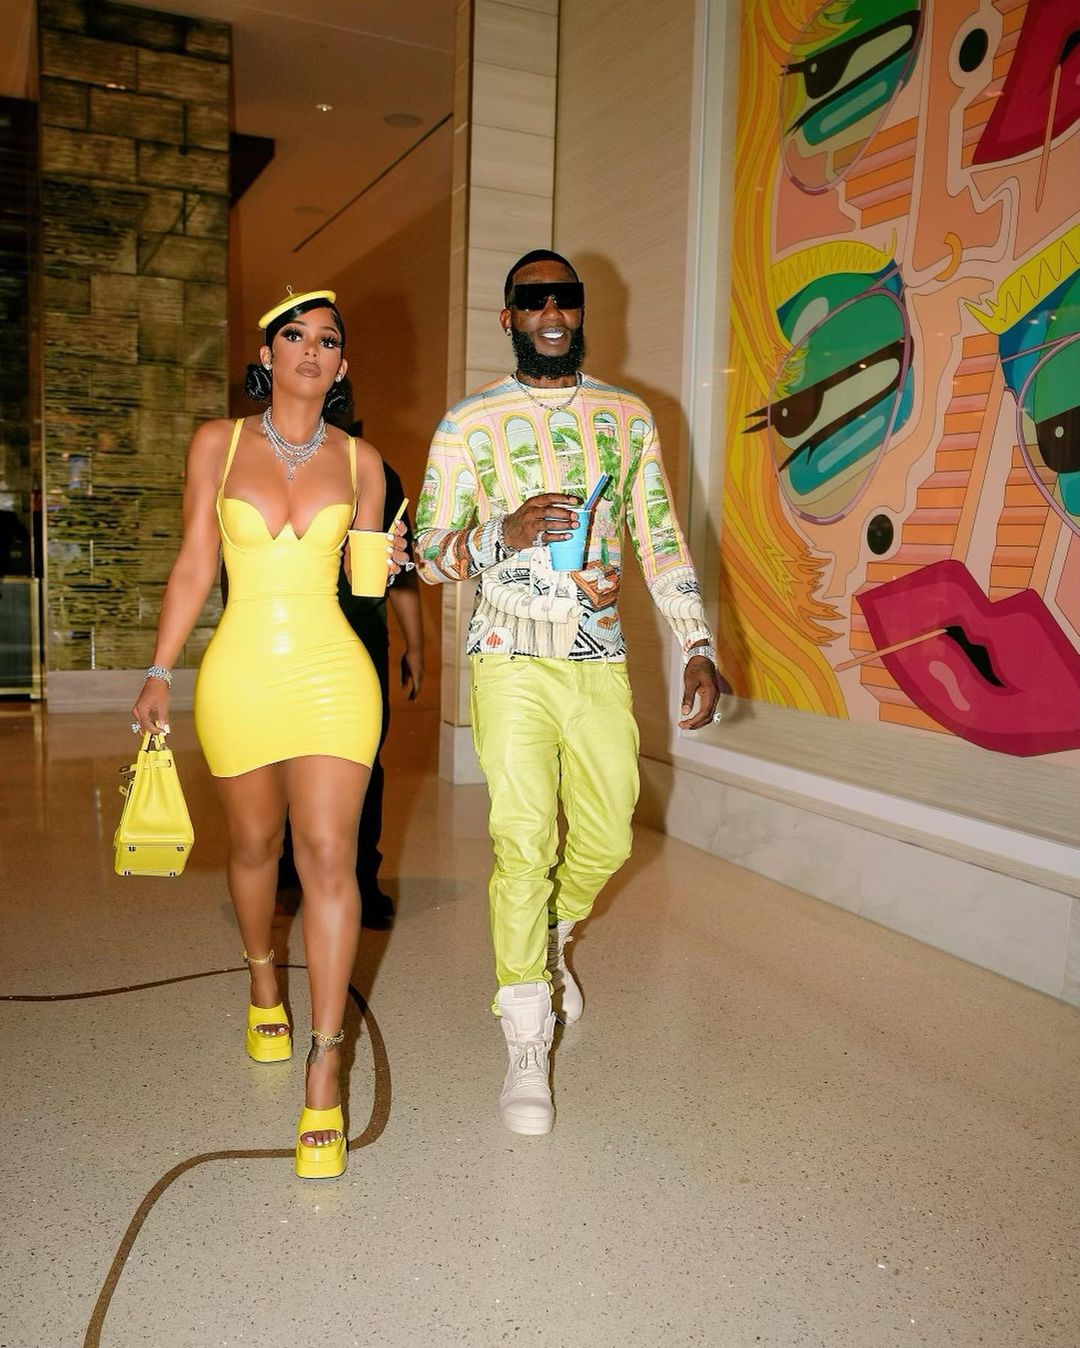 Gucci Mane Outfit from July 12, 2021  Gucci mane, Instagram model outfits,  Fashion